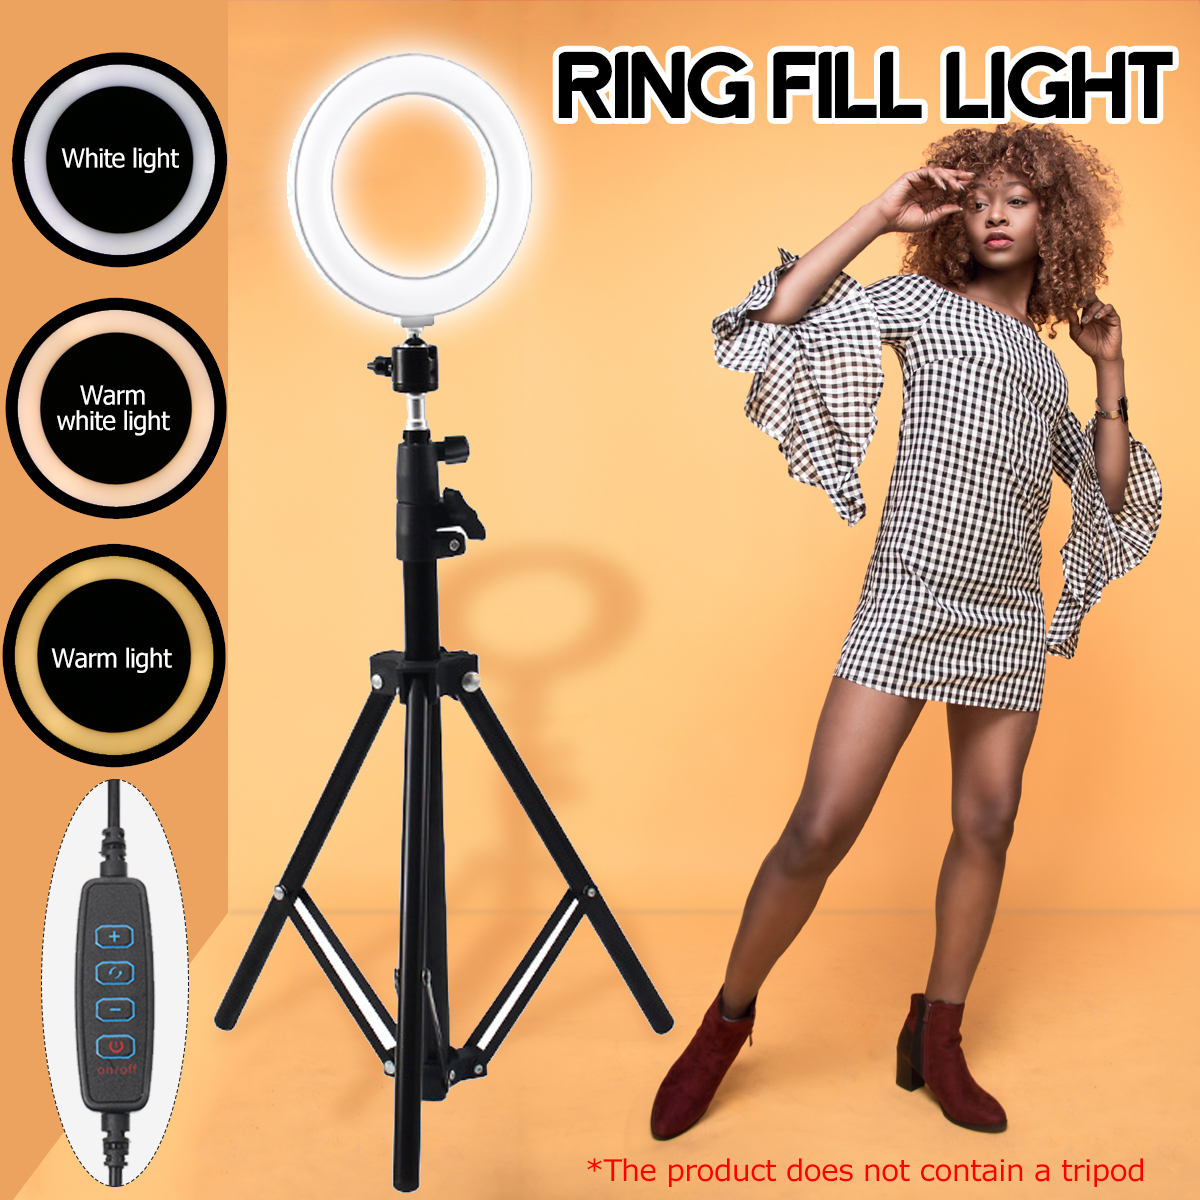 6-inch-LED-Ring-Light-Fill-Light-For-Makeup-Streaming-Selfie-Beauty-Photography-B-Makeup-Mirror-Ligh-1635732-2